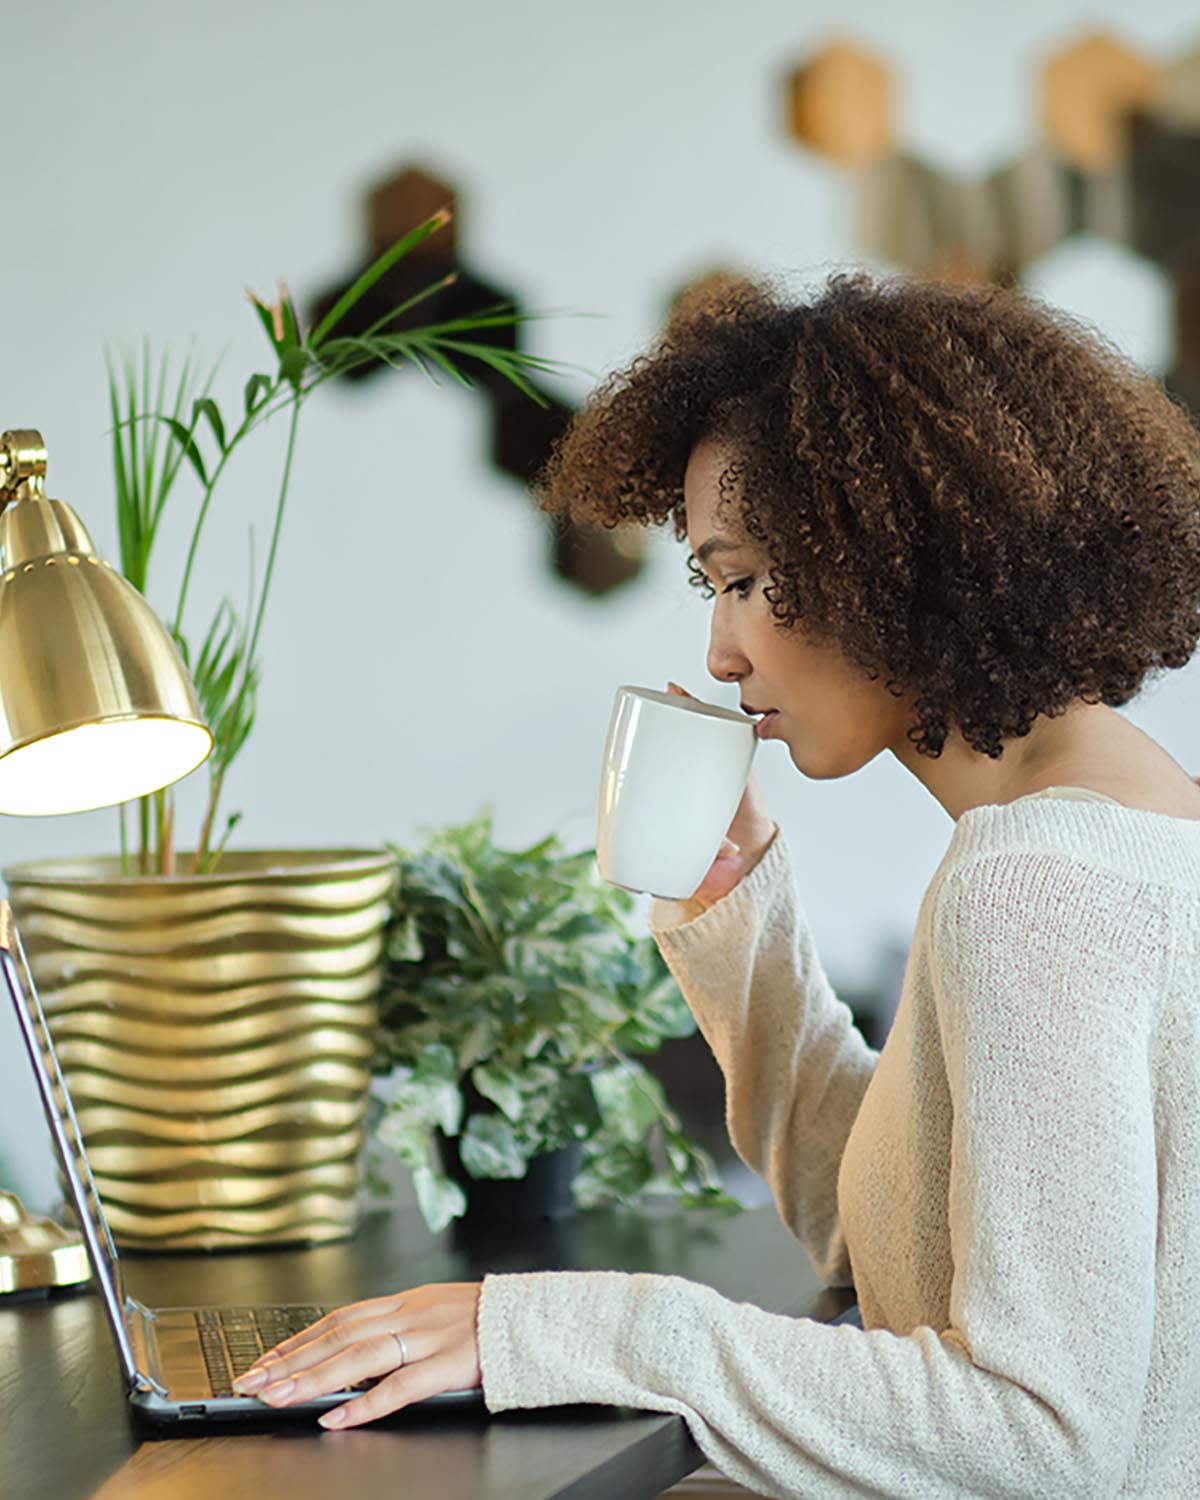 African-American woman working on laptop in front of gold metallic desk lamp in home office decorated with afro-boho glam aesthetic.